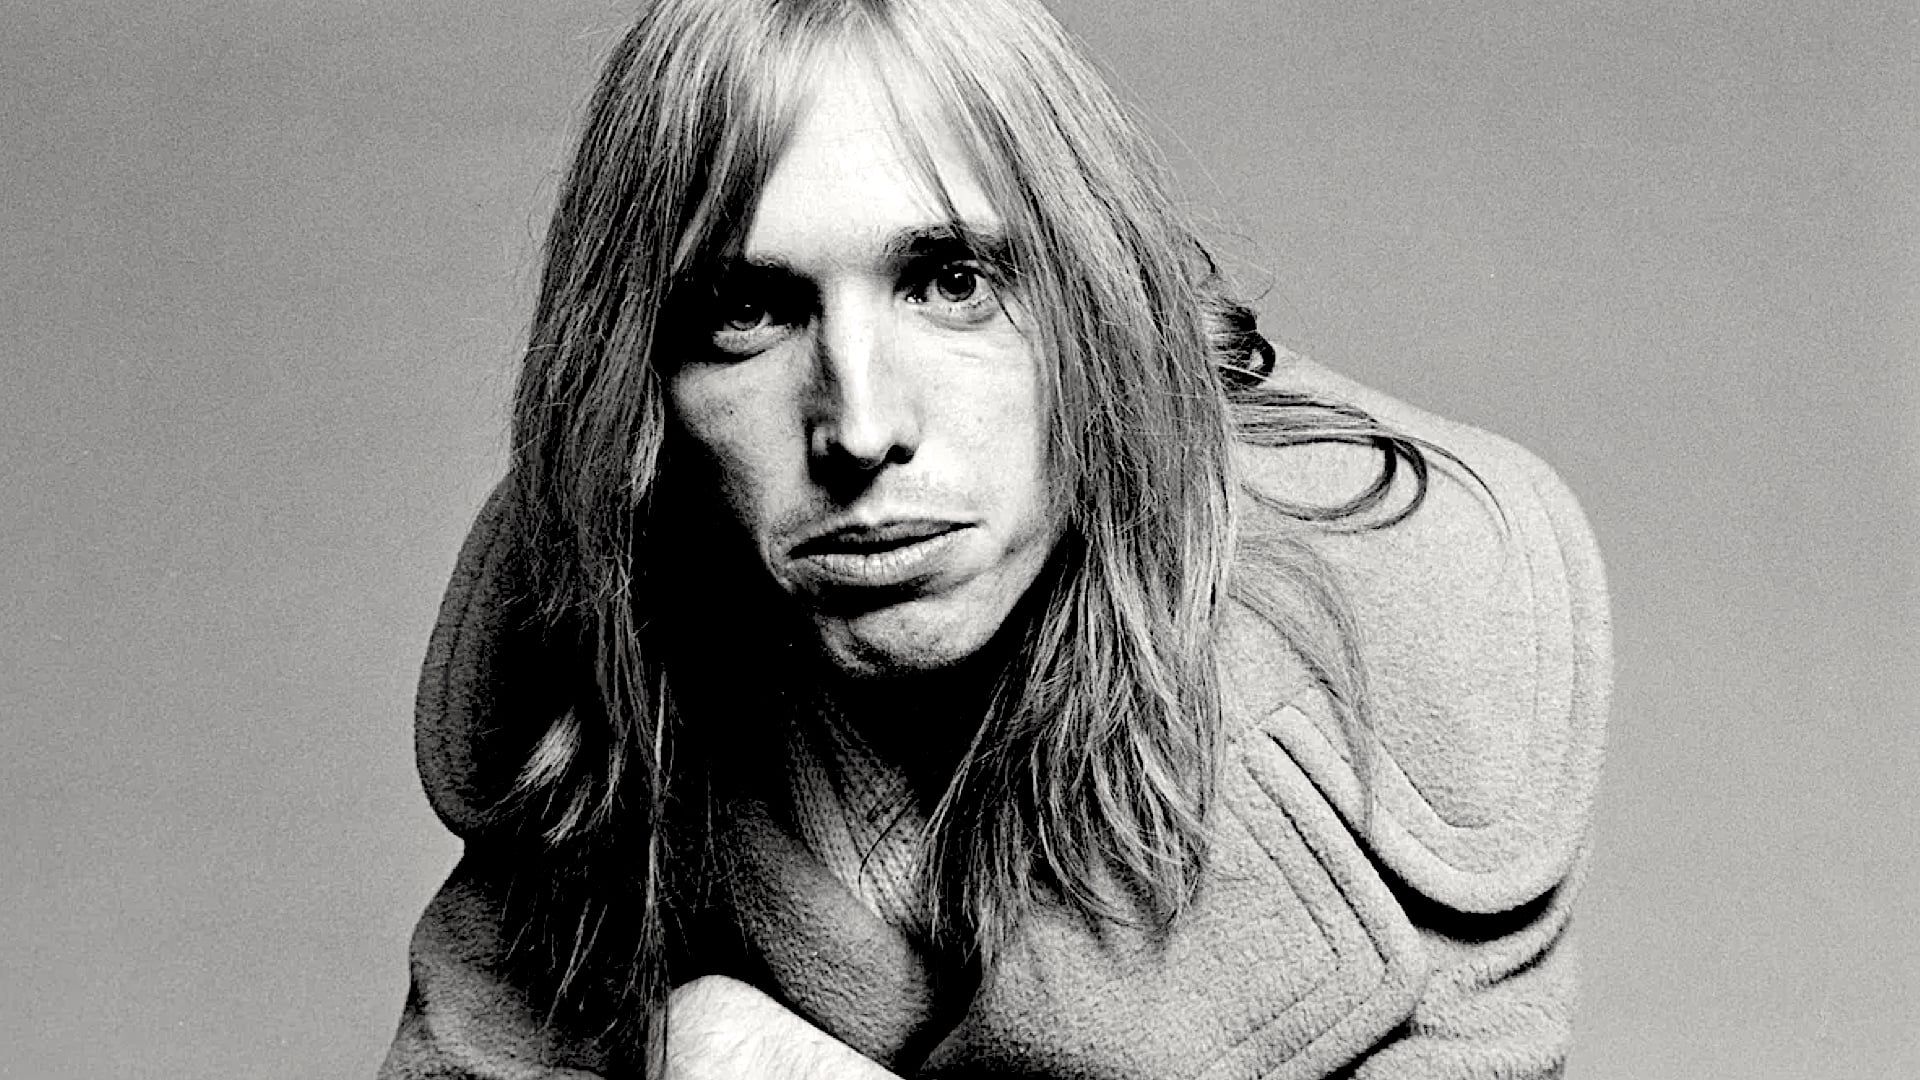 Tom Petty and the Heartbreakers: Runnin' Down a Dream background